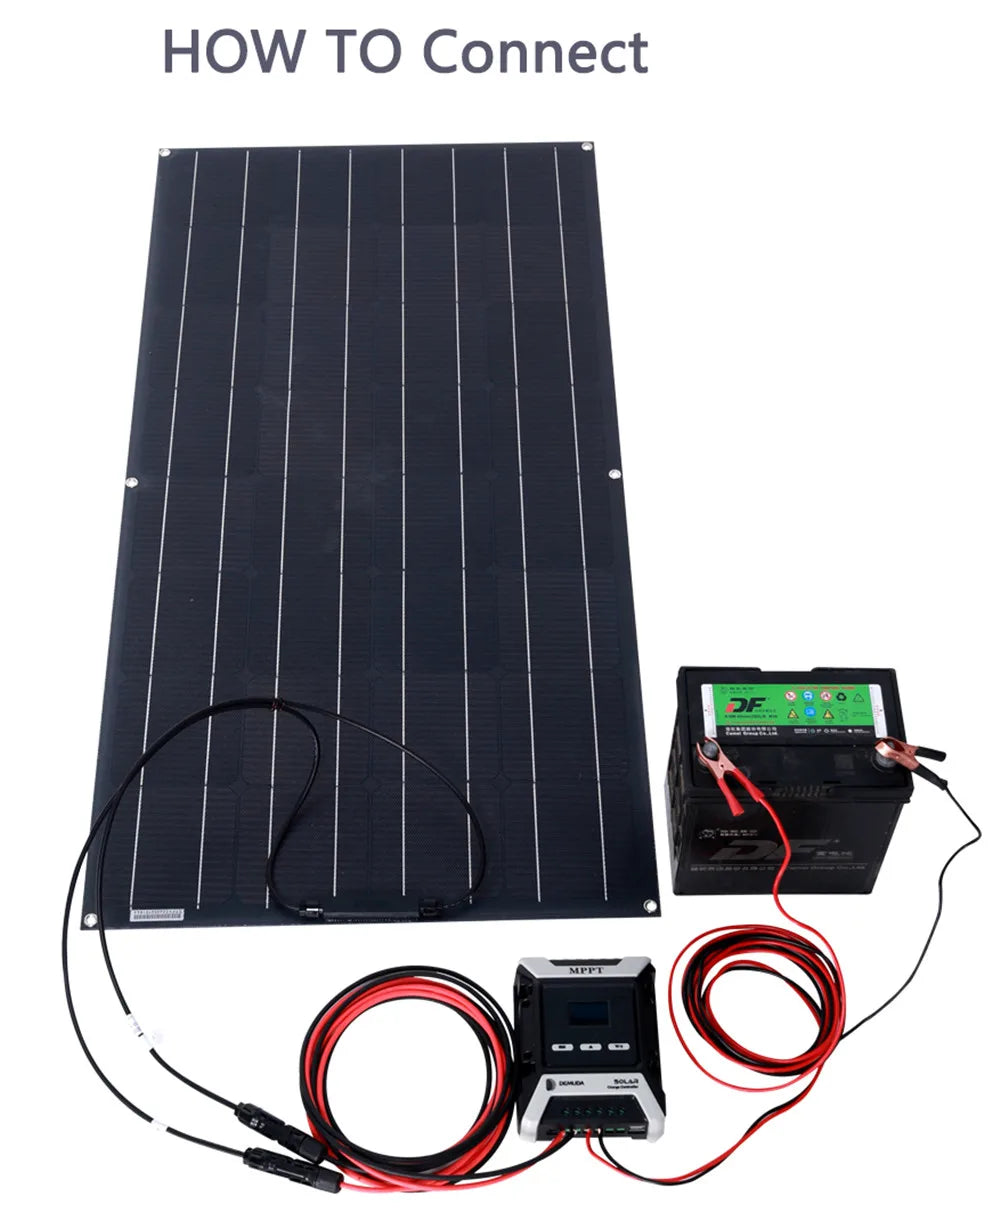 JINGYANG long lasting Semi Flexible solar panel, By-pass diodes and 2.5mm² cables with MC4 connectors pre-installed for easy installation.